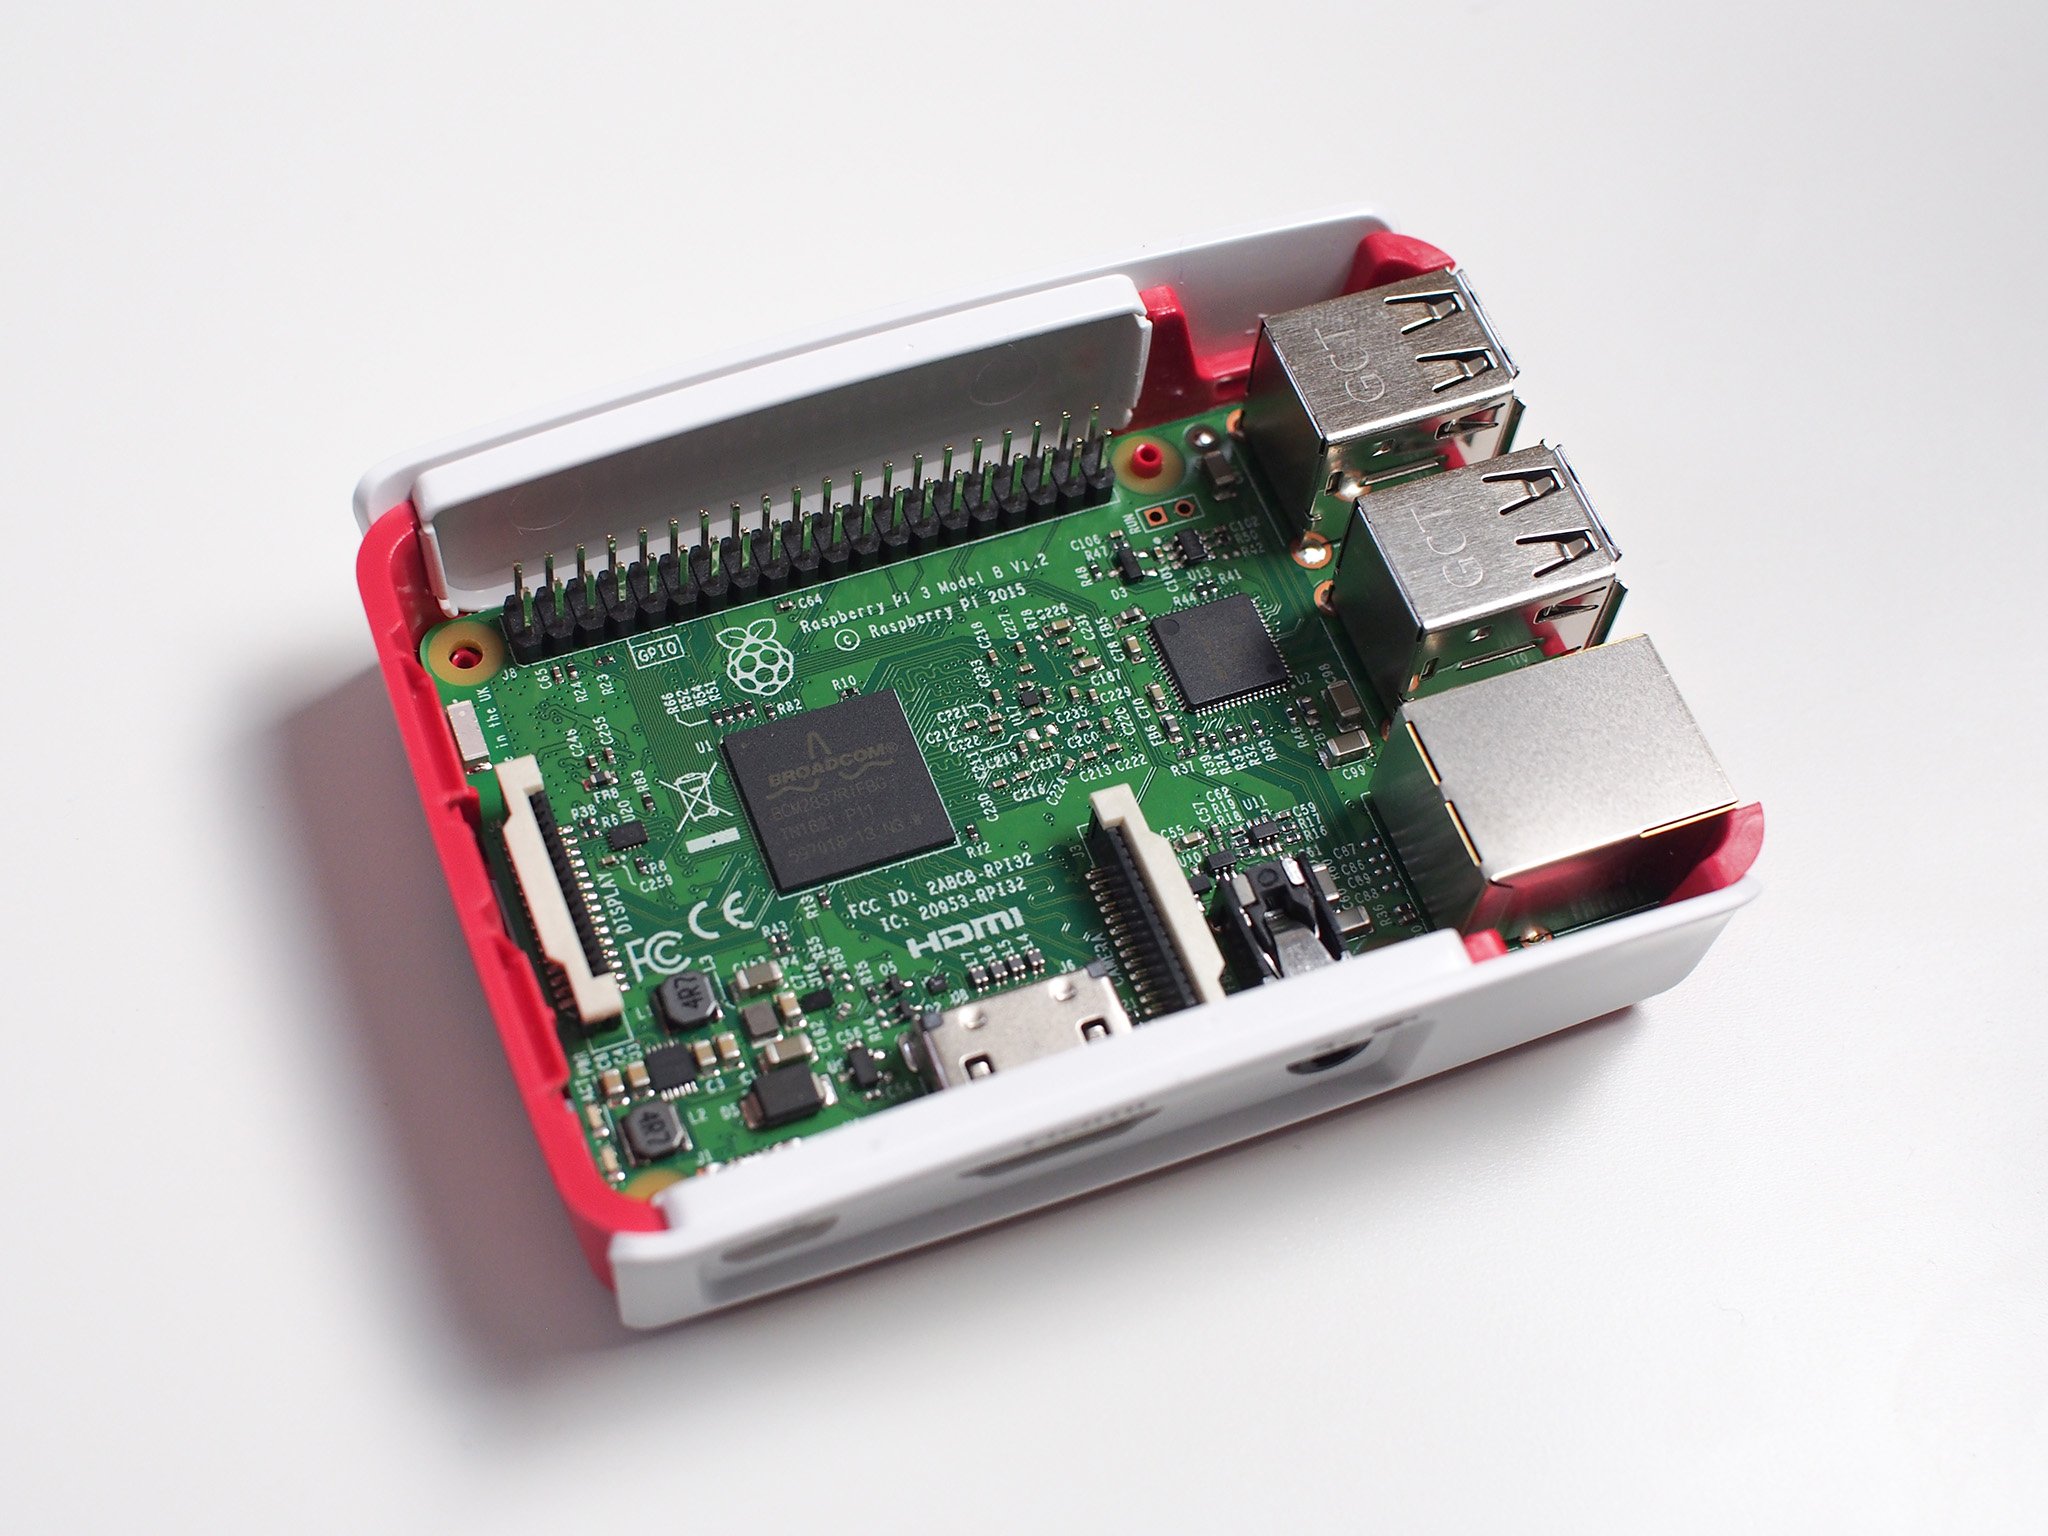 Raspberry Pi 3 vs Pi 2: What's the difference?